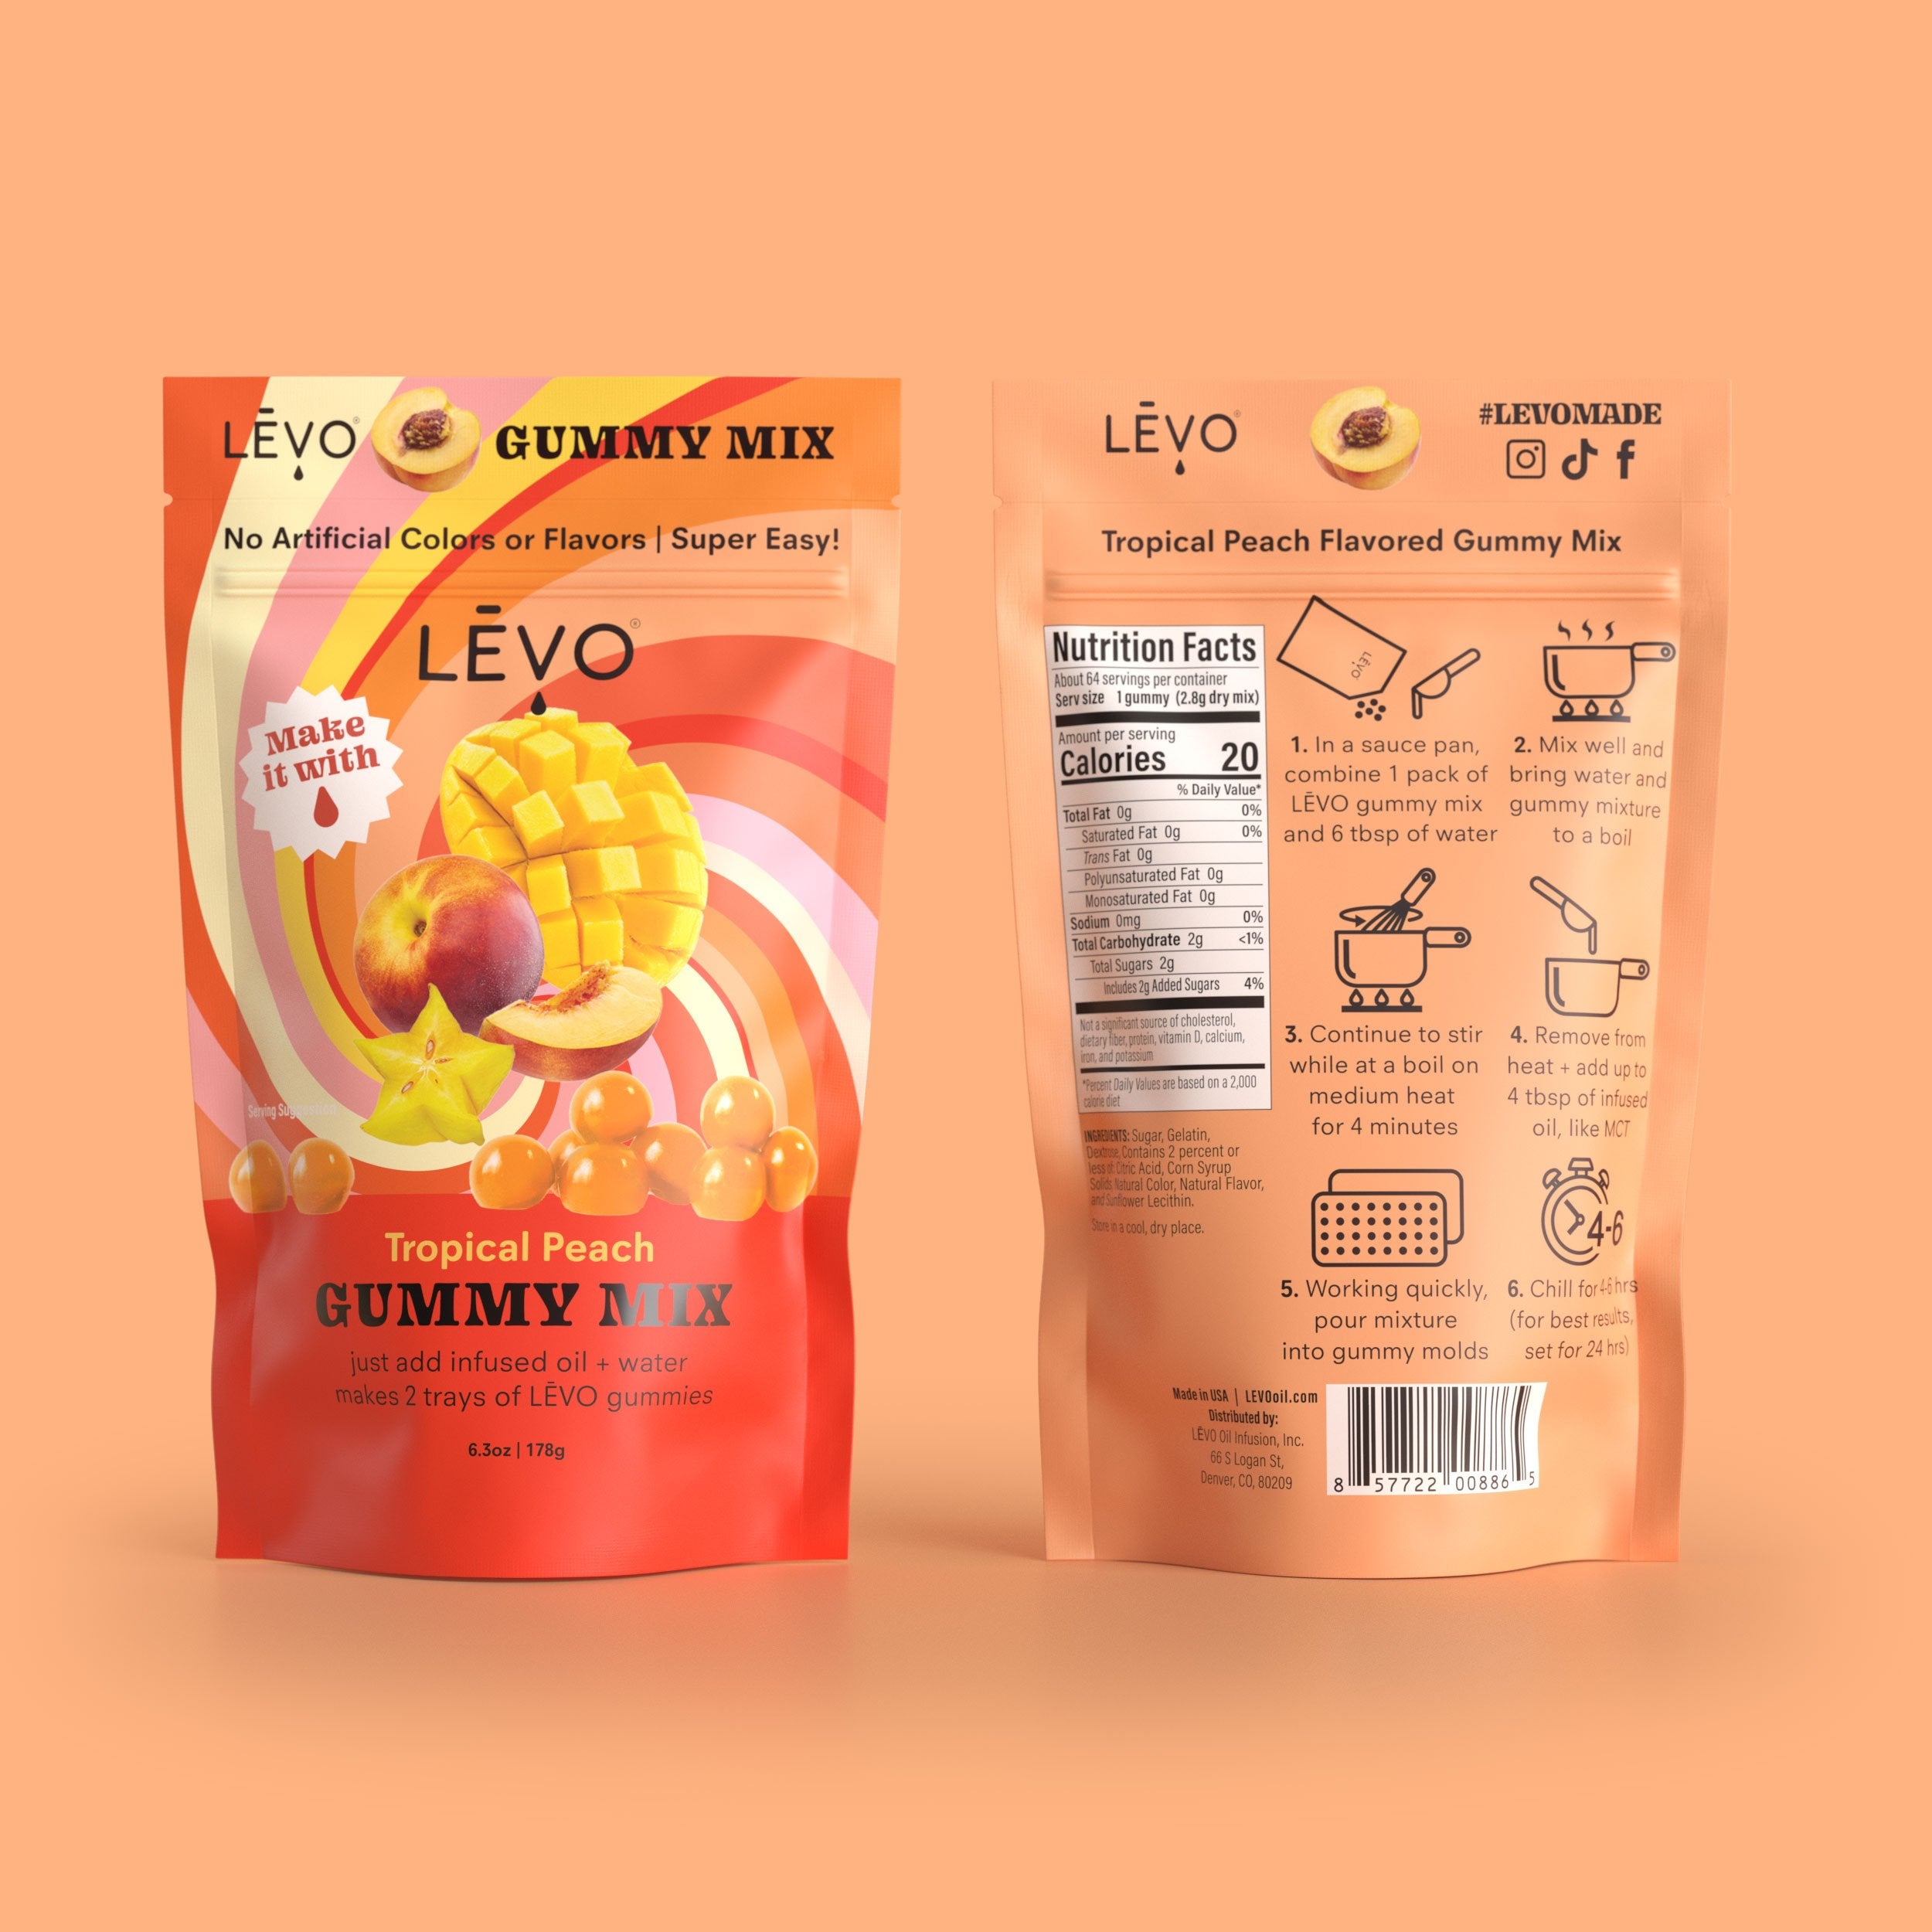 All LEVO gummies come with instructions on the back to make it easy as possible to make your own dosed edibles. Don't forget to share your gummies with friends and store them in a safe place.